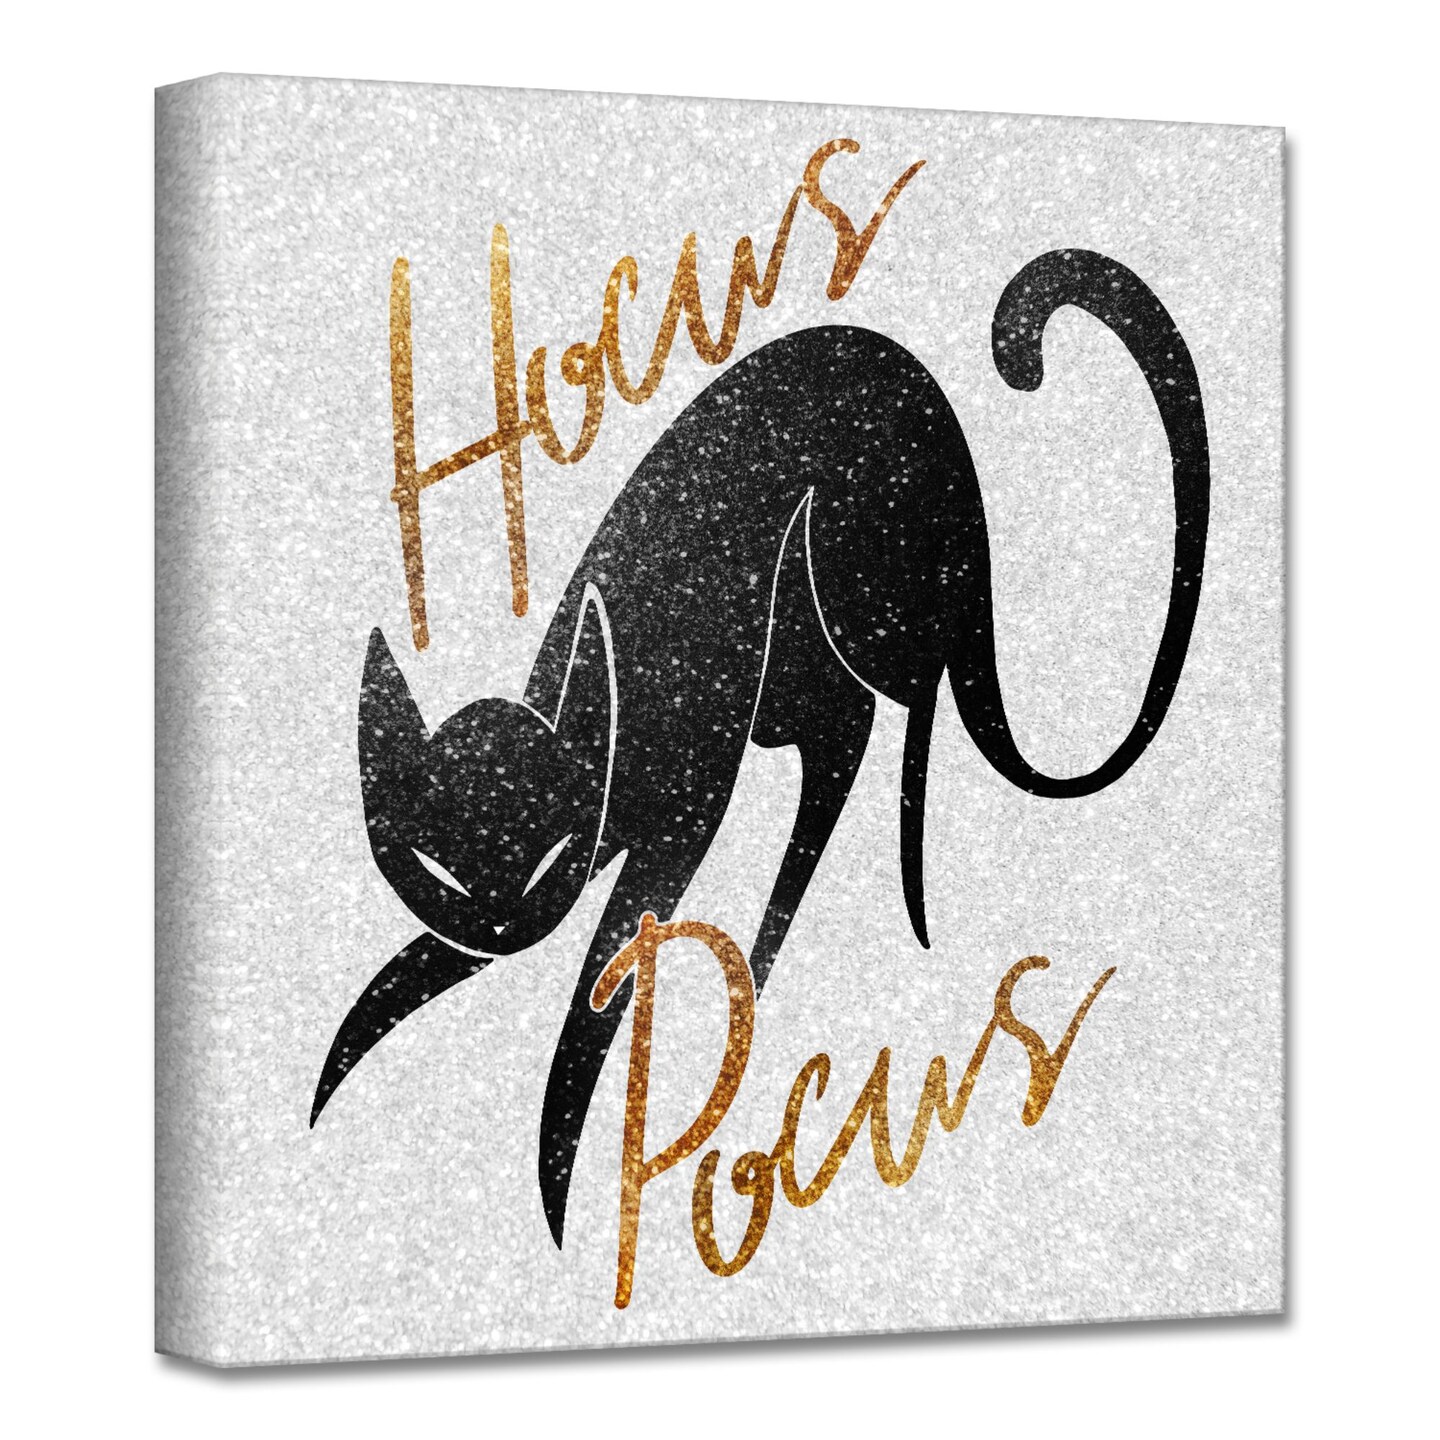 Crafted Creations Gray and Black &#x27;Hocus Pocus&#x27; Canvas Halloween Wall Art Decor 20&#x22; x 20&#x22;